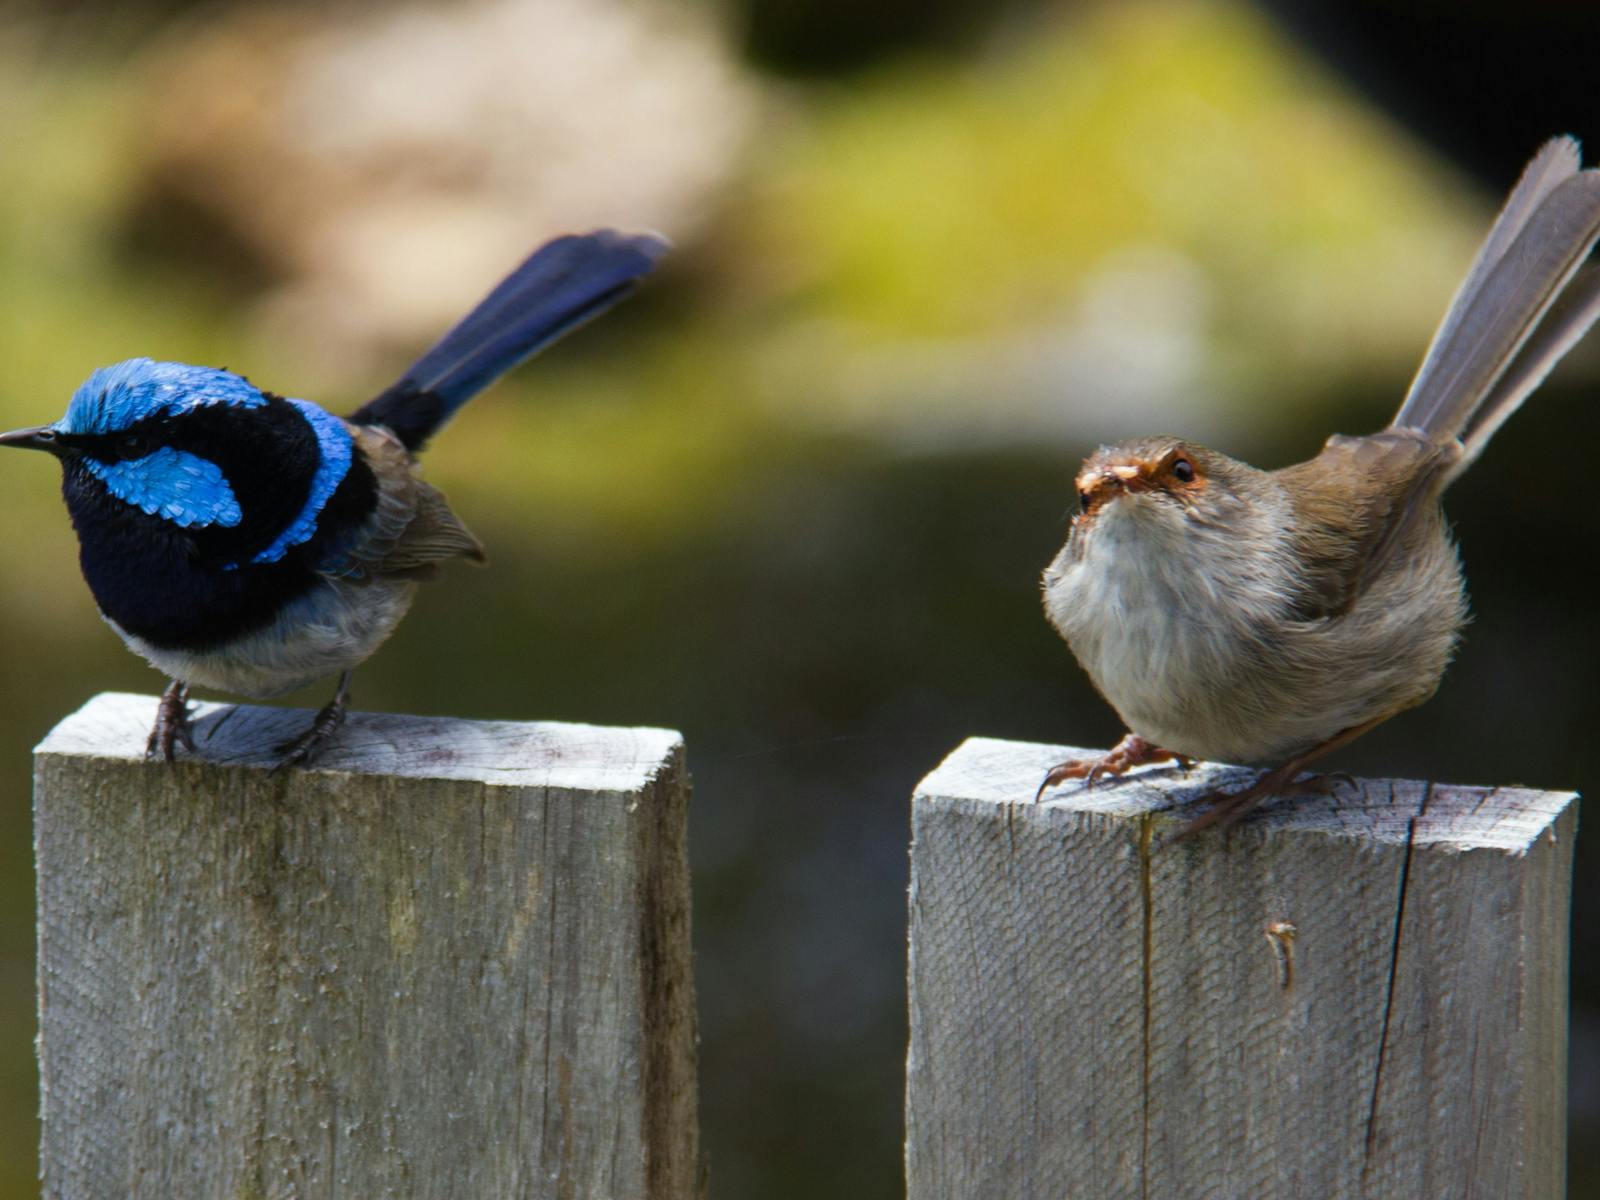 Male & Female wrens on fence at Corinna